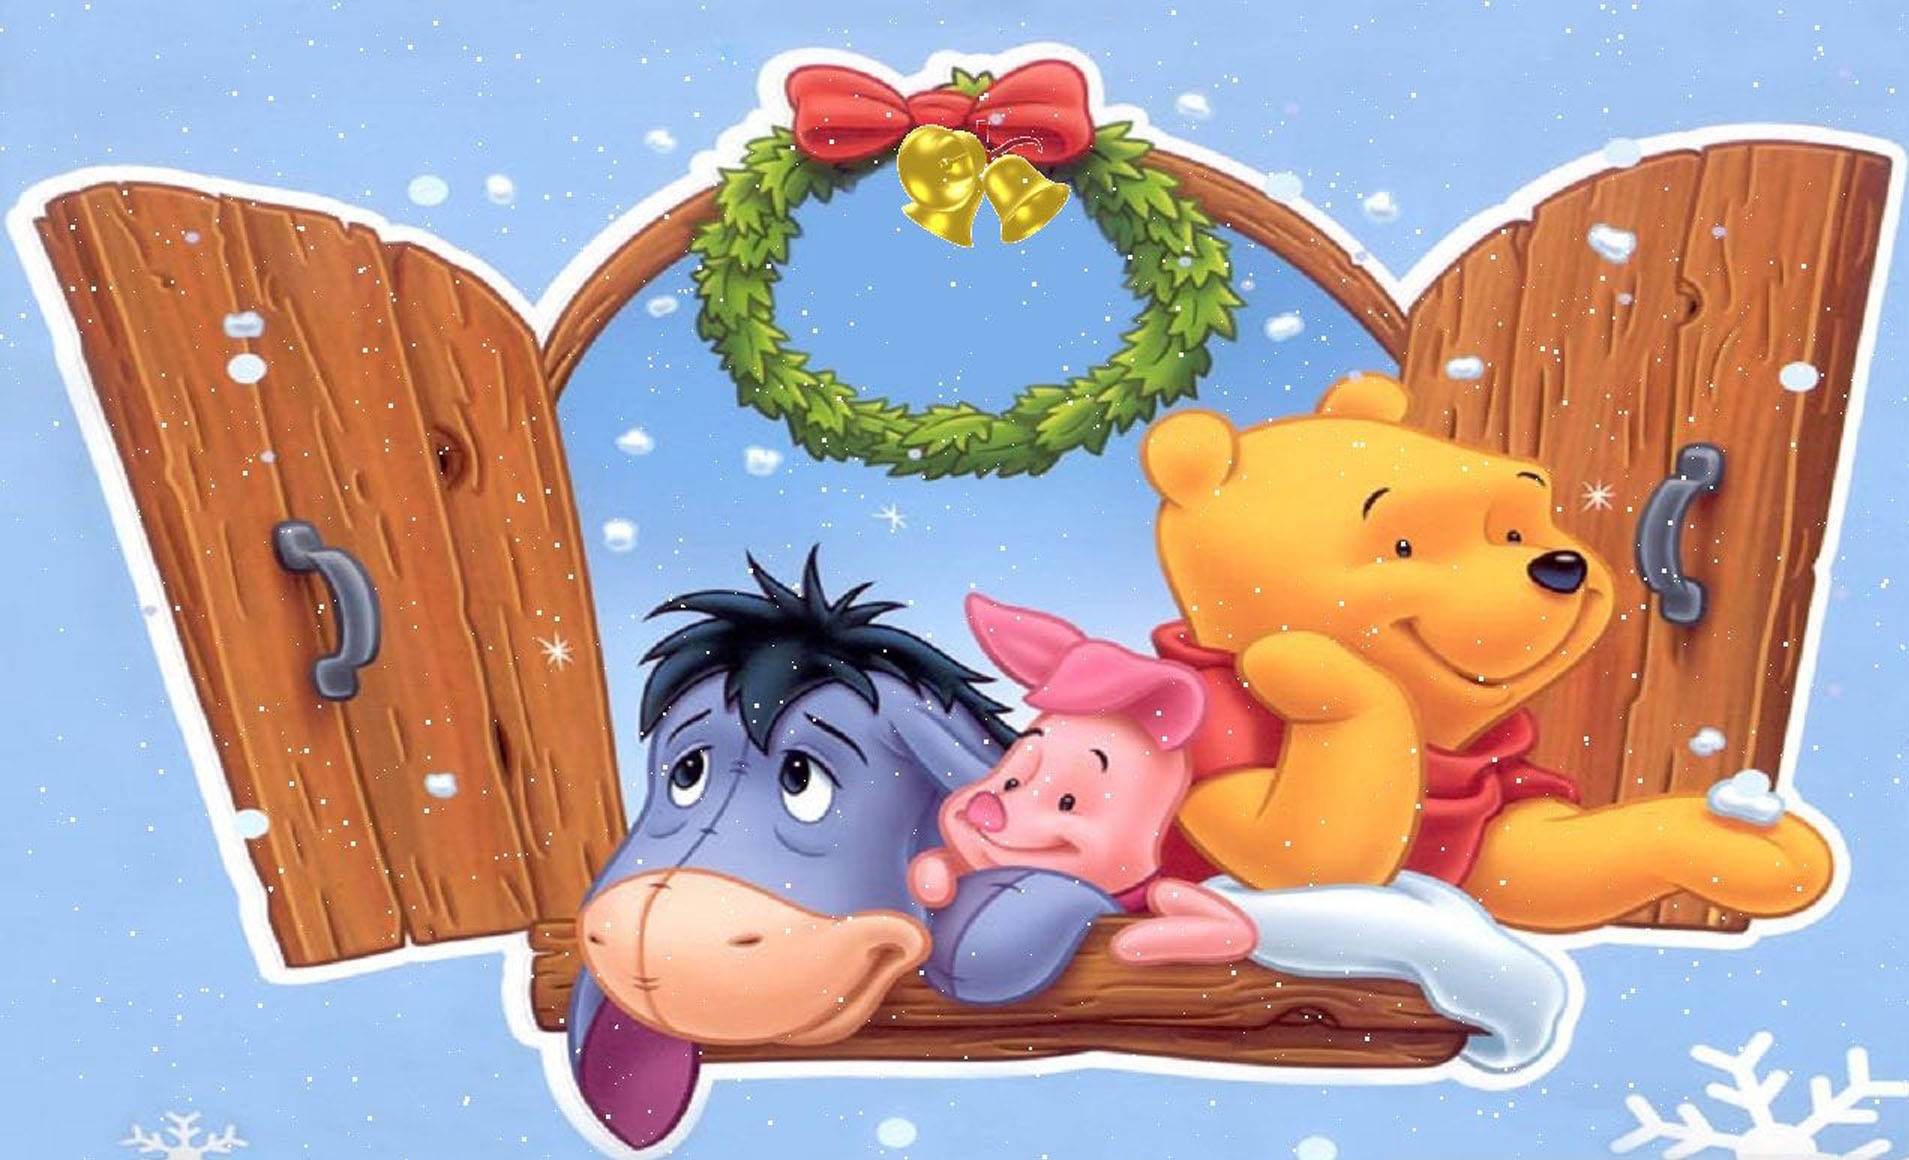 Celebrate Christmas with Winnie the Pooh Wallpaper